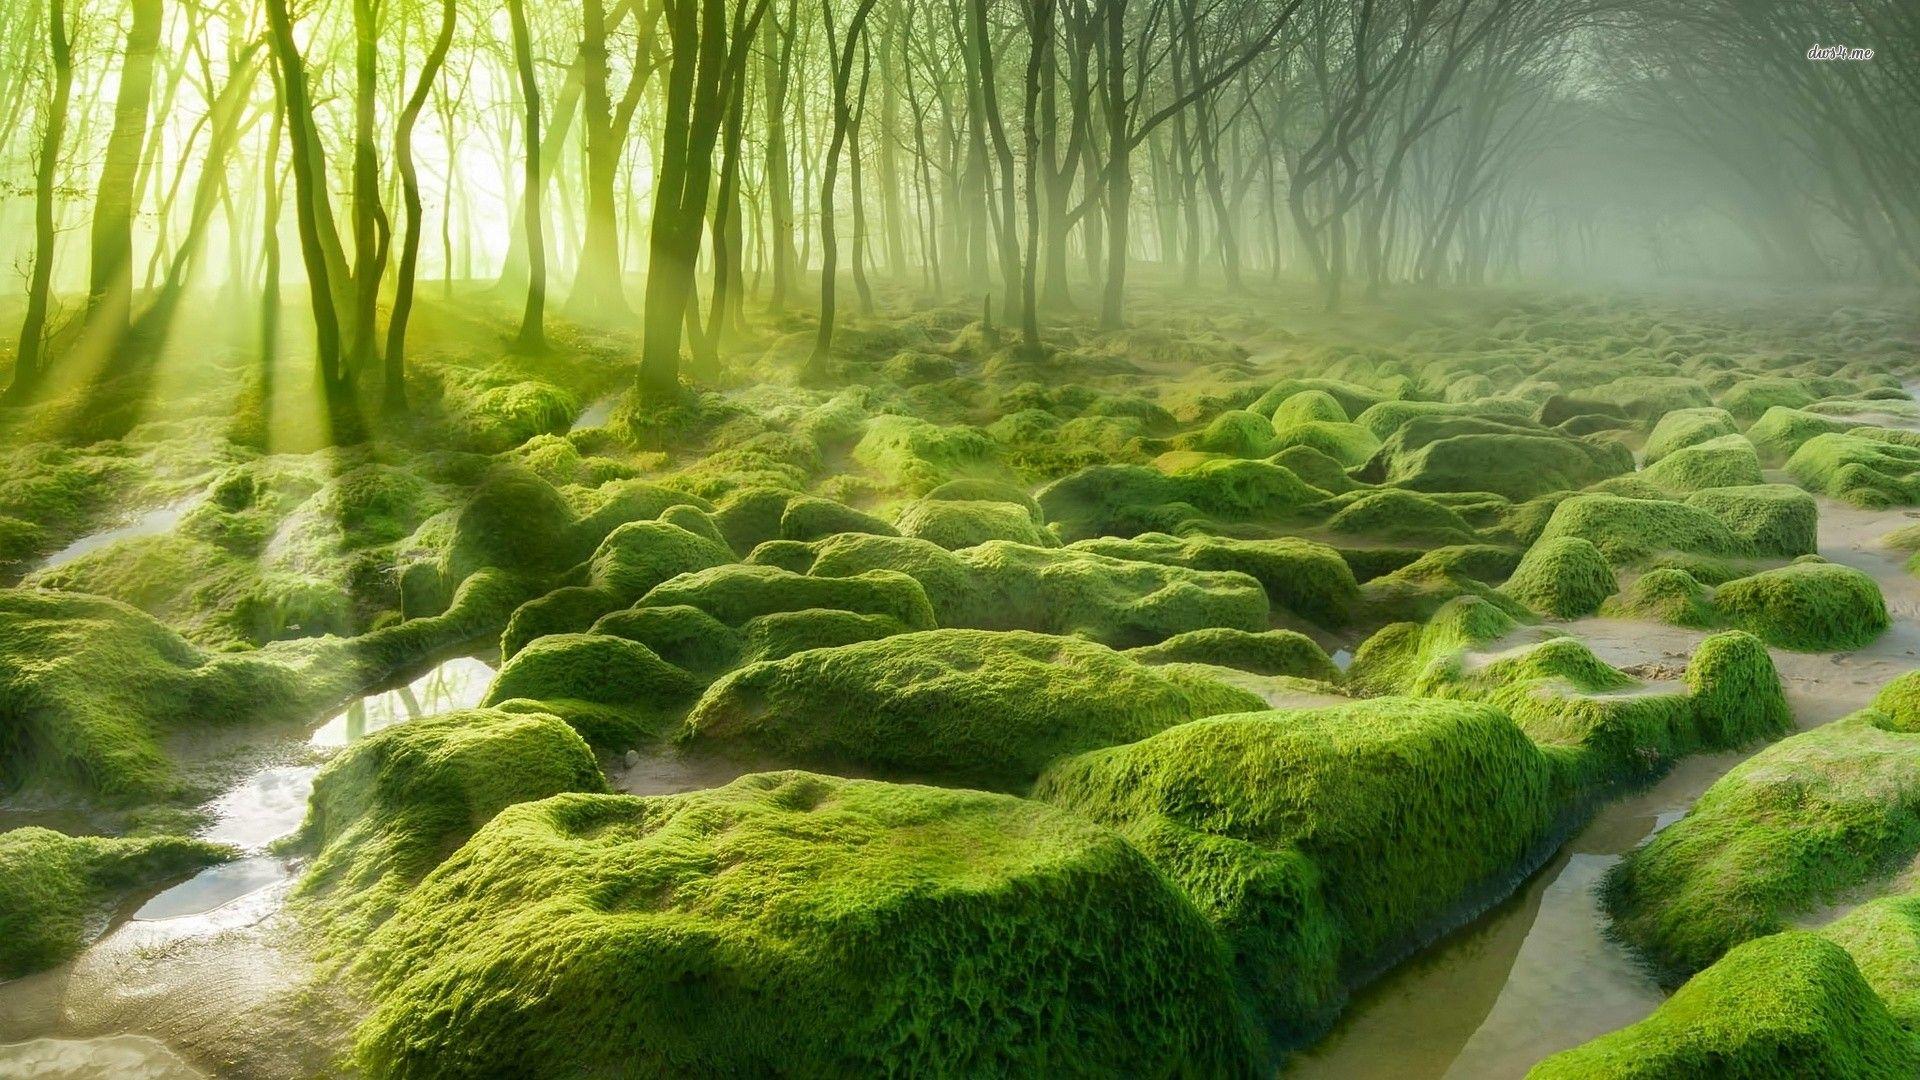 Forests: Water Rocks Nature Forest Moss Rock Mossy Green Wallpaper